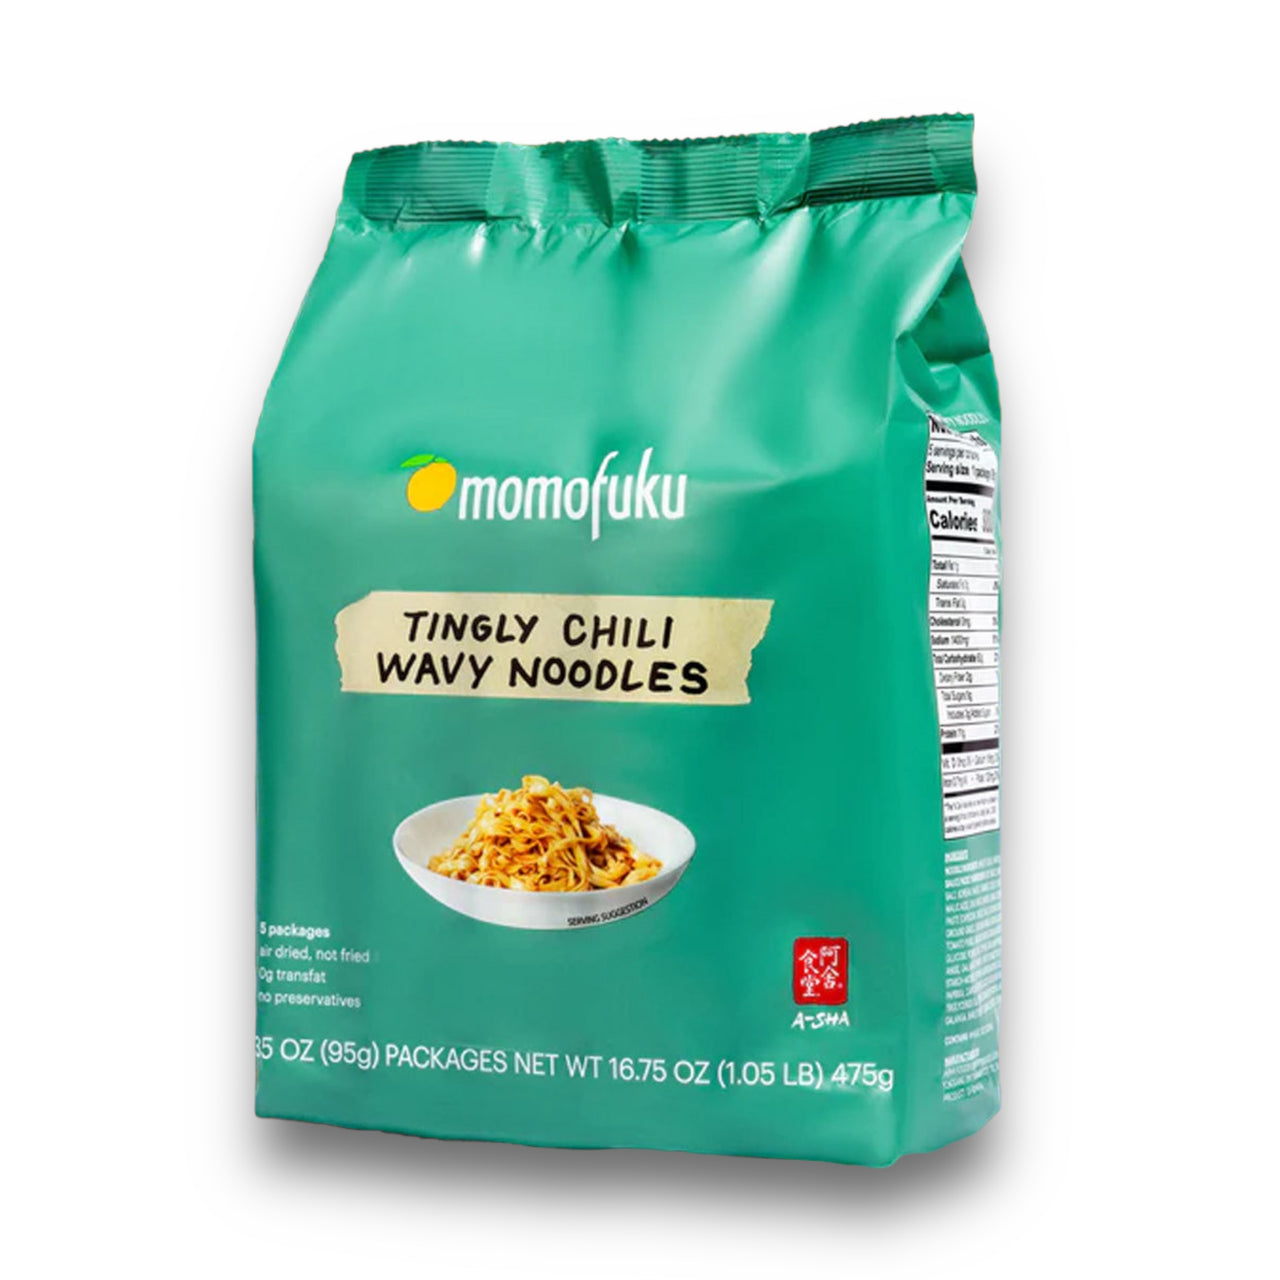 Tingly Chili Wavy Noodles